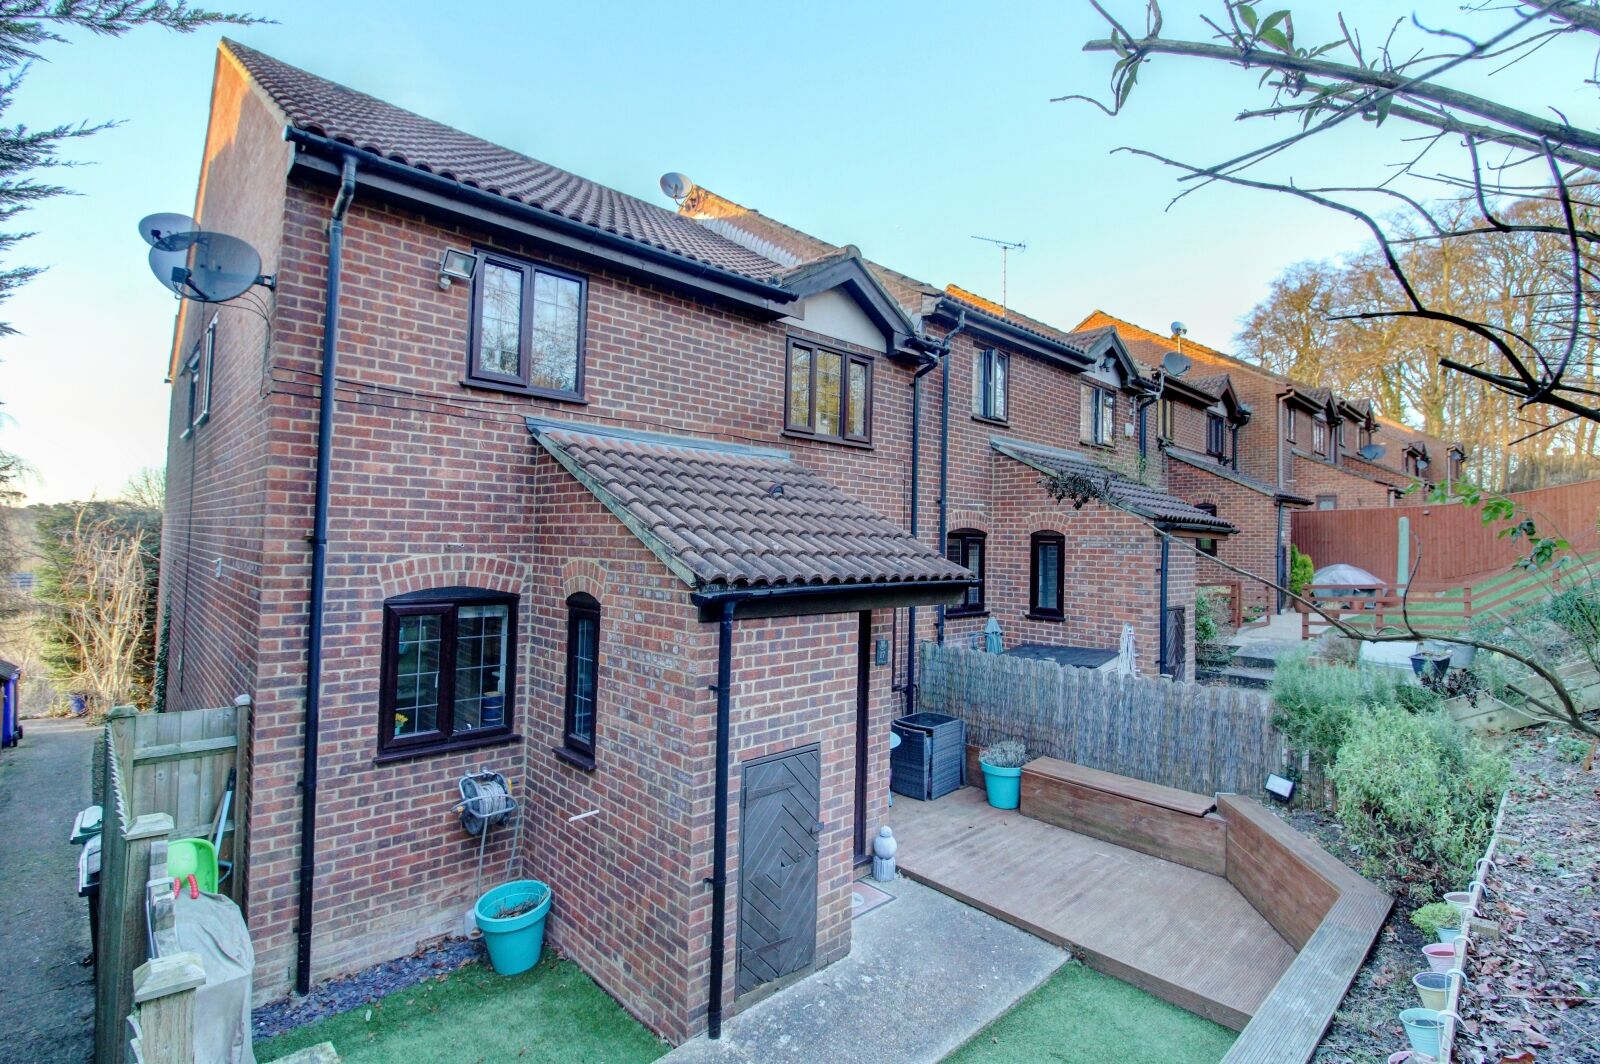 2 bedroom mid terraced house for sale Green Hill, High Wycombe, HP13, main image